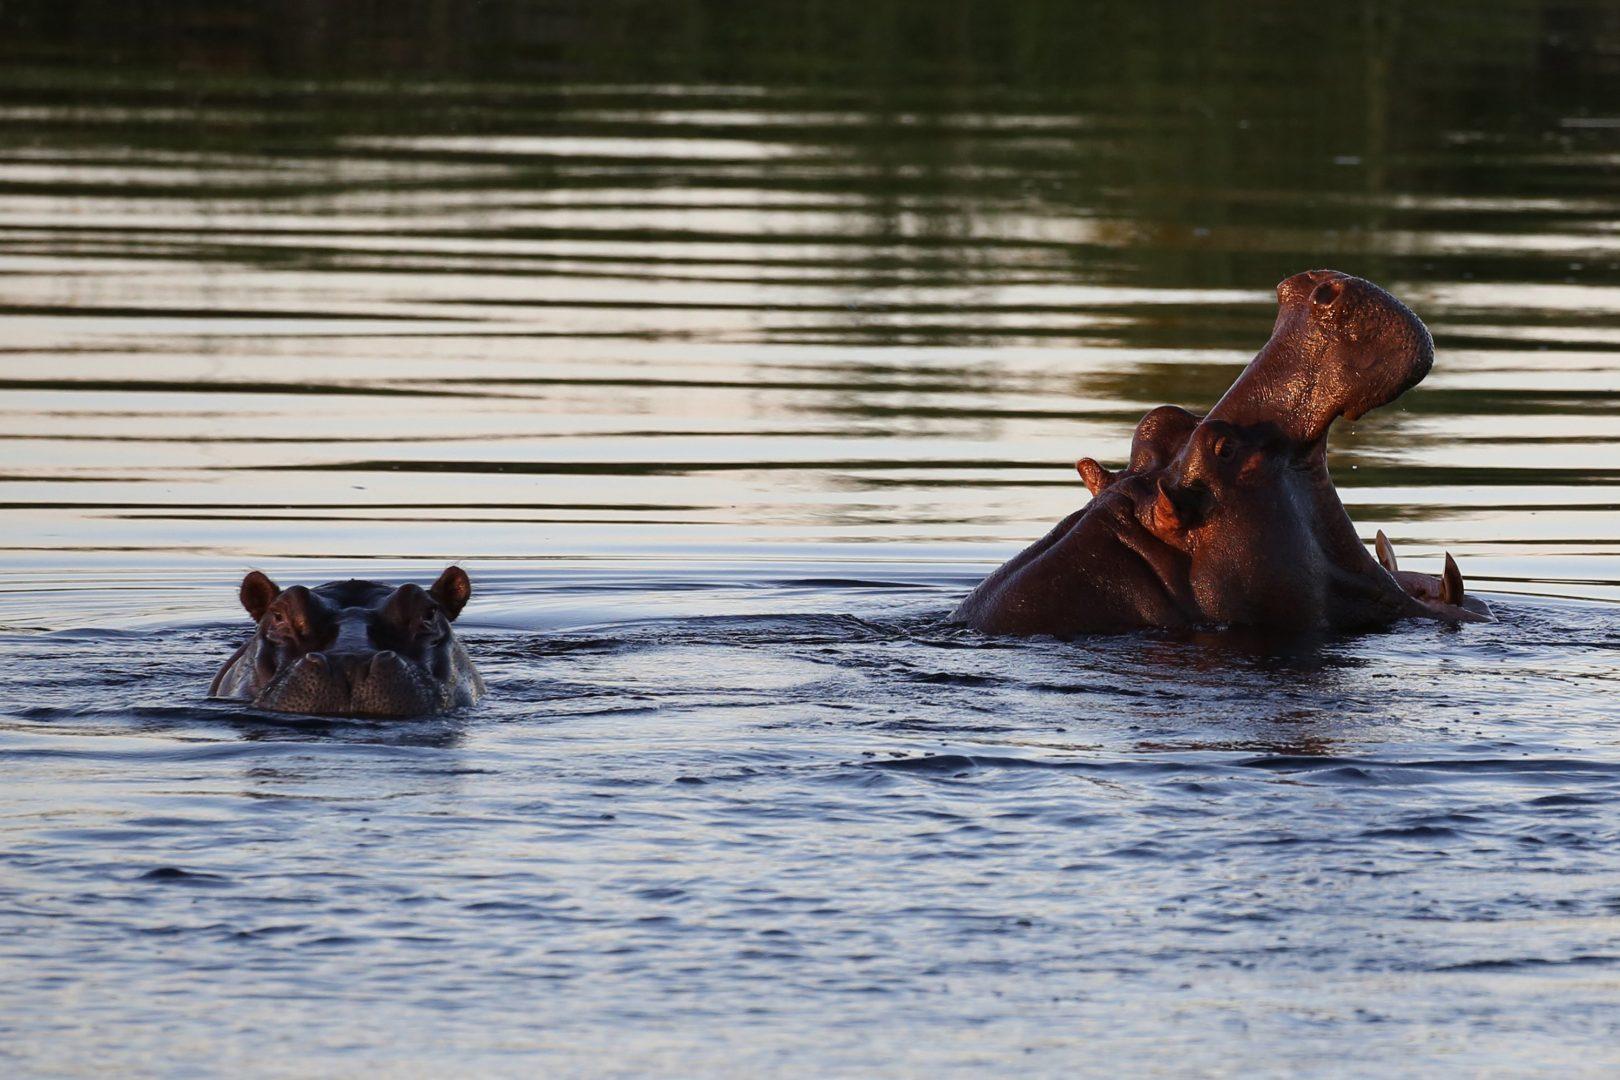 Hippos+pop+up+their+heads+during+a+cruise+along+the+Kwando+River+in+Namibia.+Twenty-two+hippopotamuses+have+died+from+anthrax+disease+at+Liwonde+National+Park+in+Malawi+over+the+past+two+months%2C+a+wildlife+official+said+on+Tuesday.+%28Michaela+Urban%2FChicago+Tribune%2FTNS%29